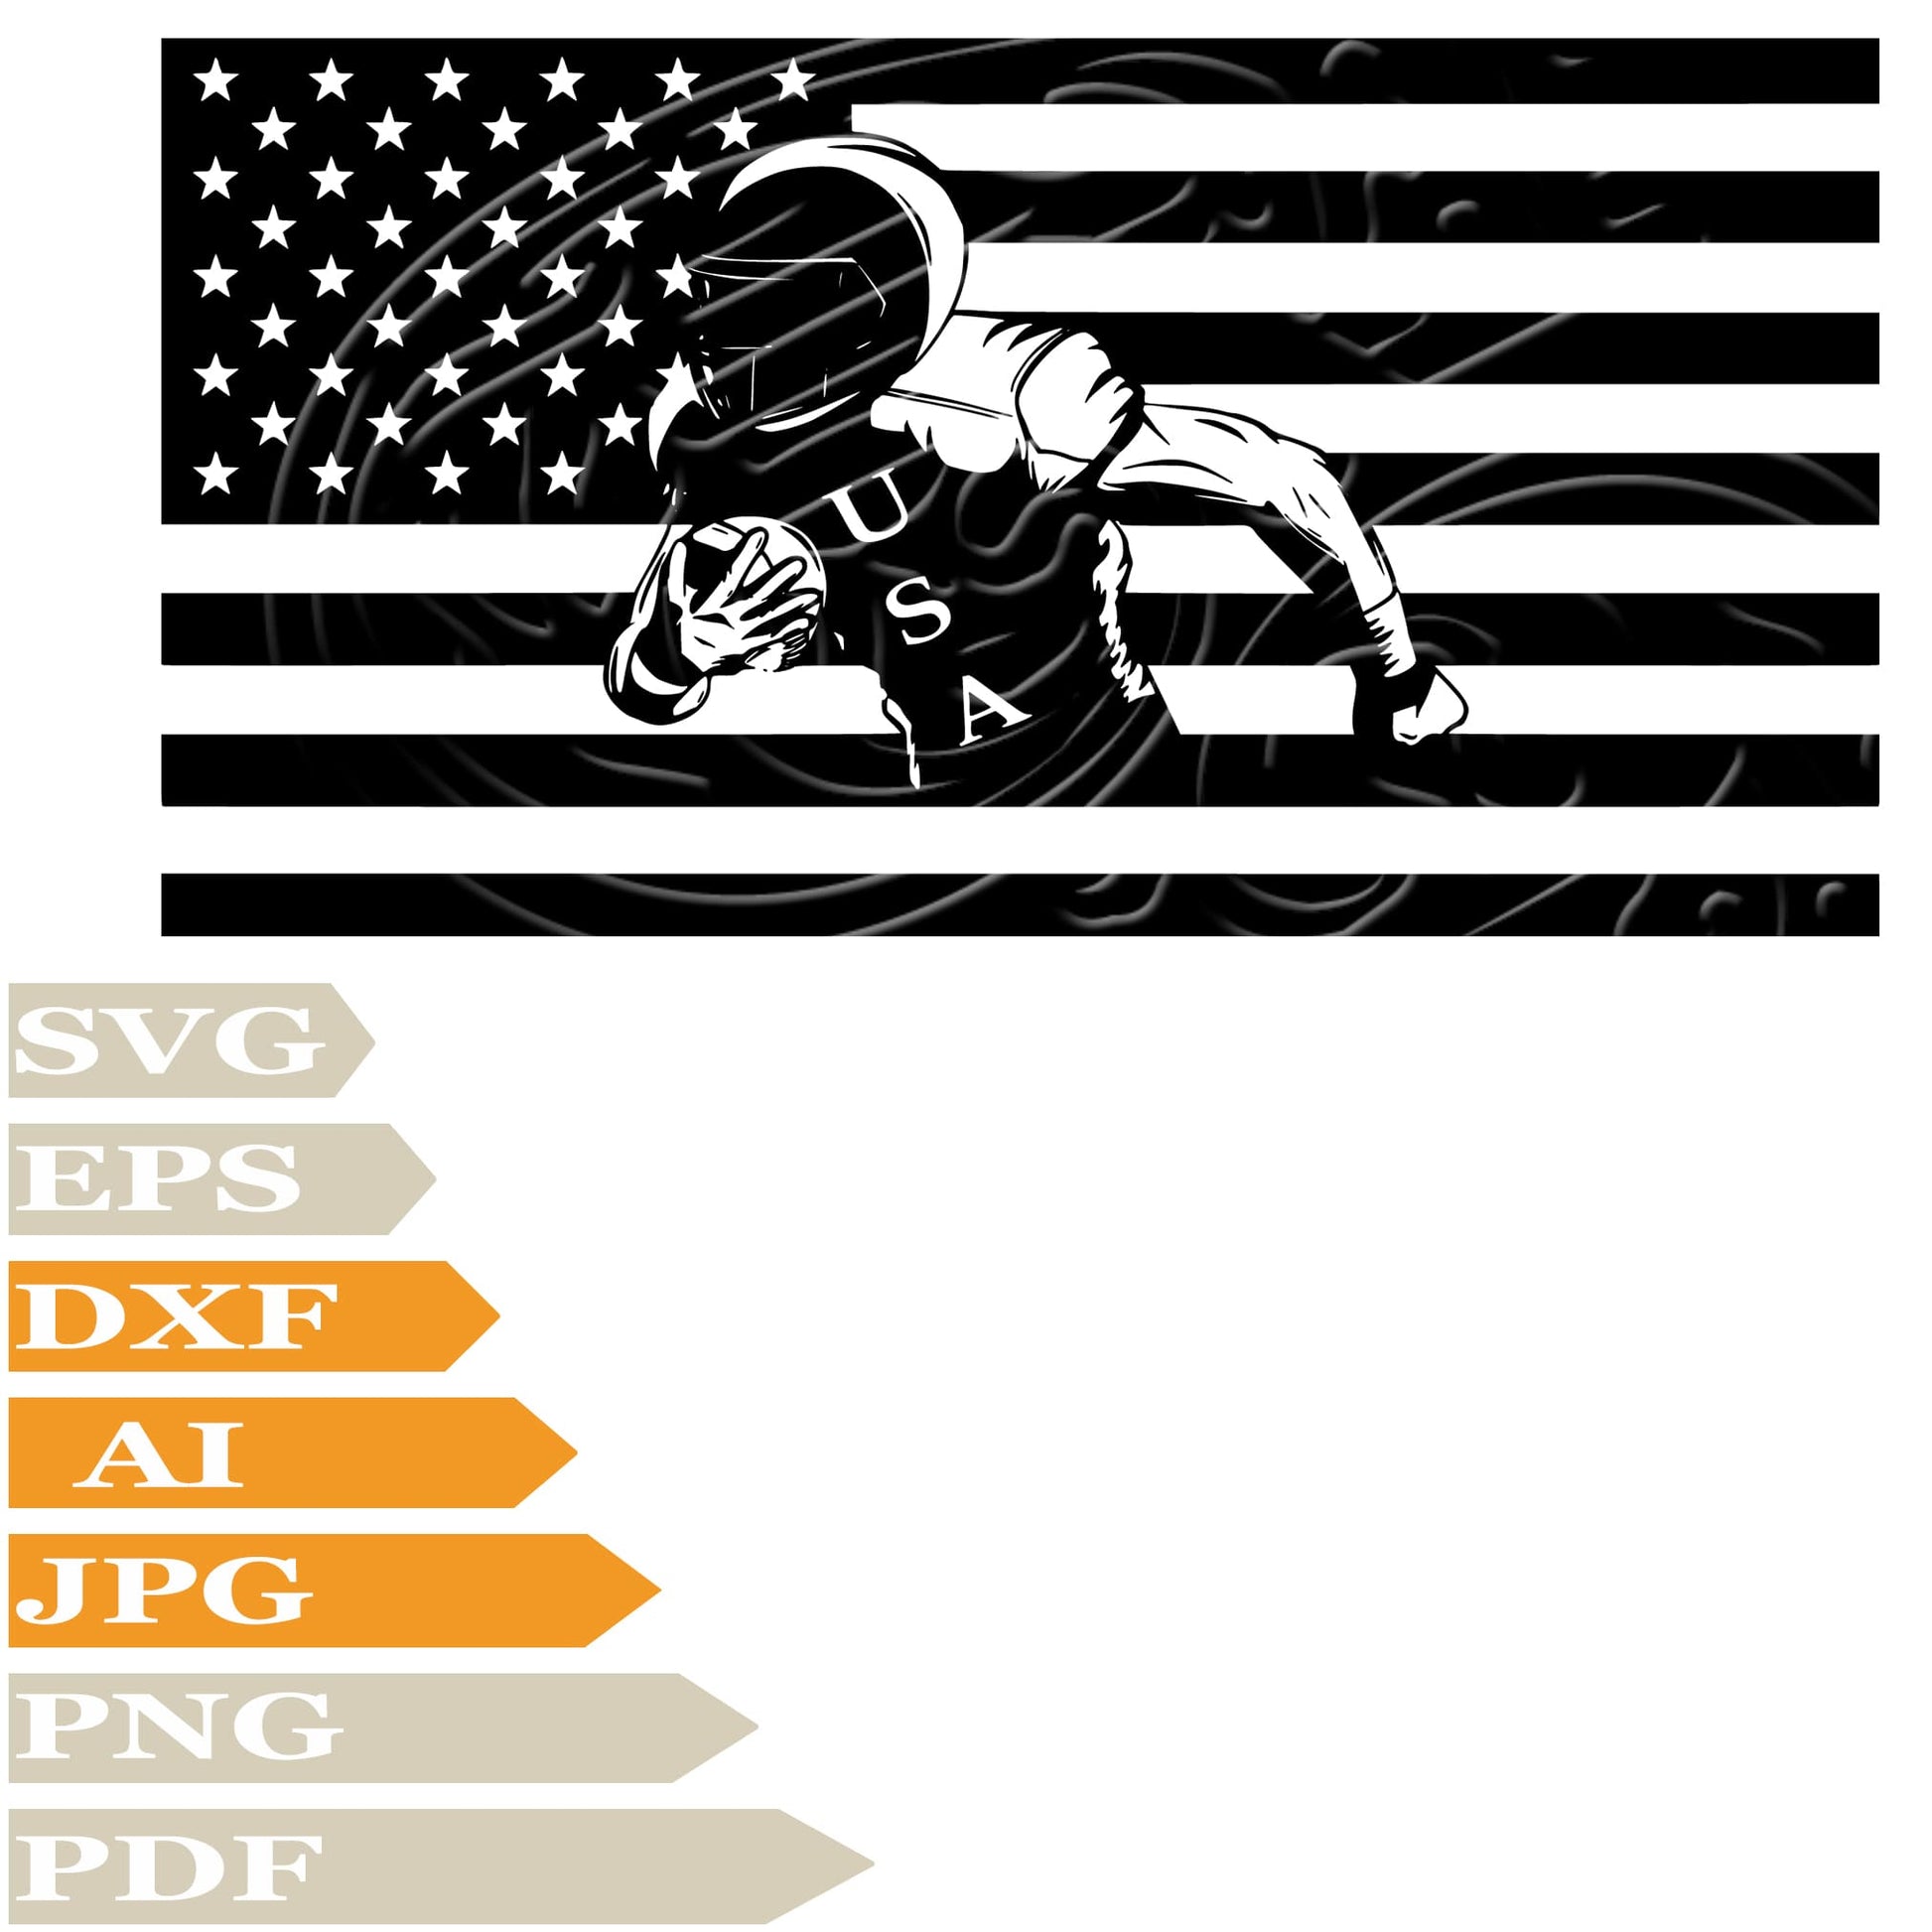 American Footbal Plaayer, Usa Flag Svg File, Image Cut, Png, For Tattoo, Silhouette, Digital Vector Download, Cut File, Clipart, For Cricut